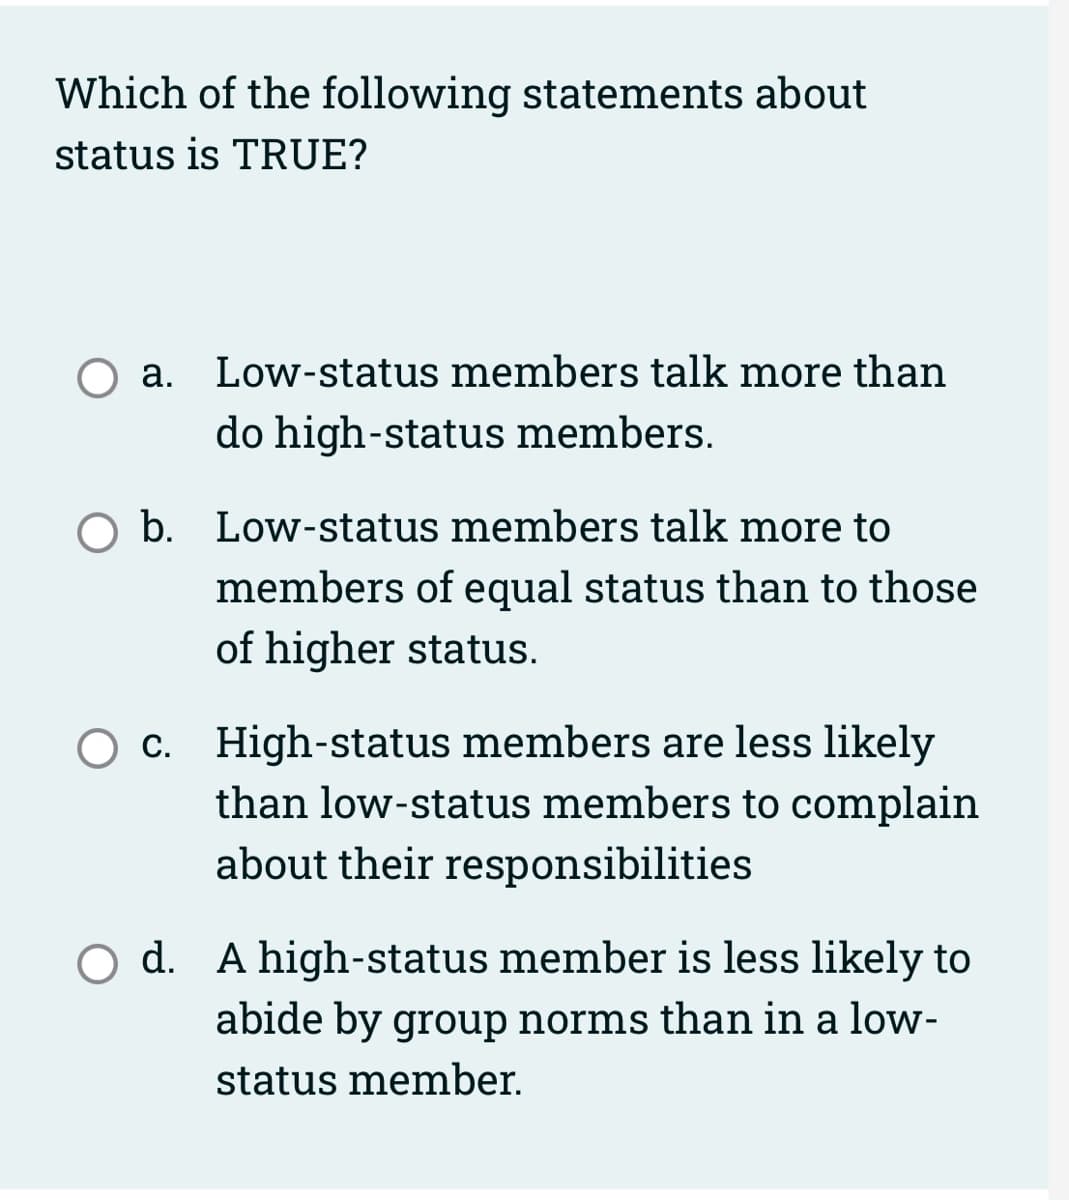 Which of the following statements about
status is TRUE?
a. Low-status members talk more than
do high-status members.
b. Low-status members talk more to
members of equal status than to those
of higher status.
O c. High-status members are less likely
than low-status members to complain
about their responsibilities
O d. A high-status member is less likely to
abide by group norms than in a low-
status member.